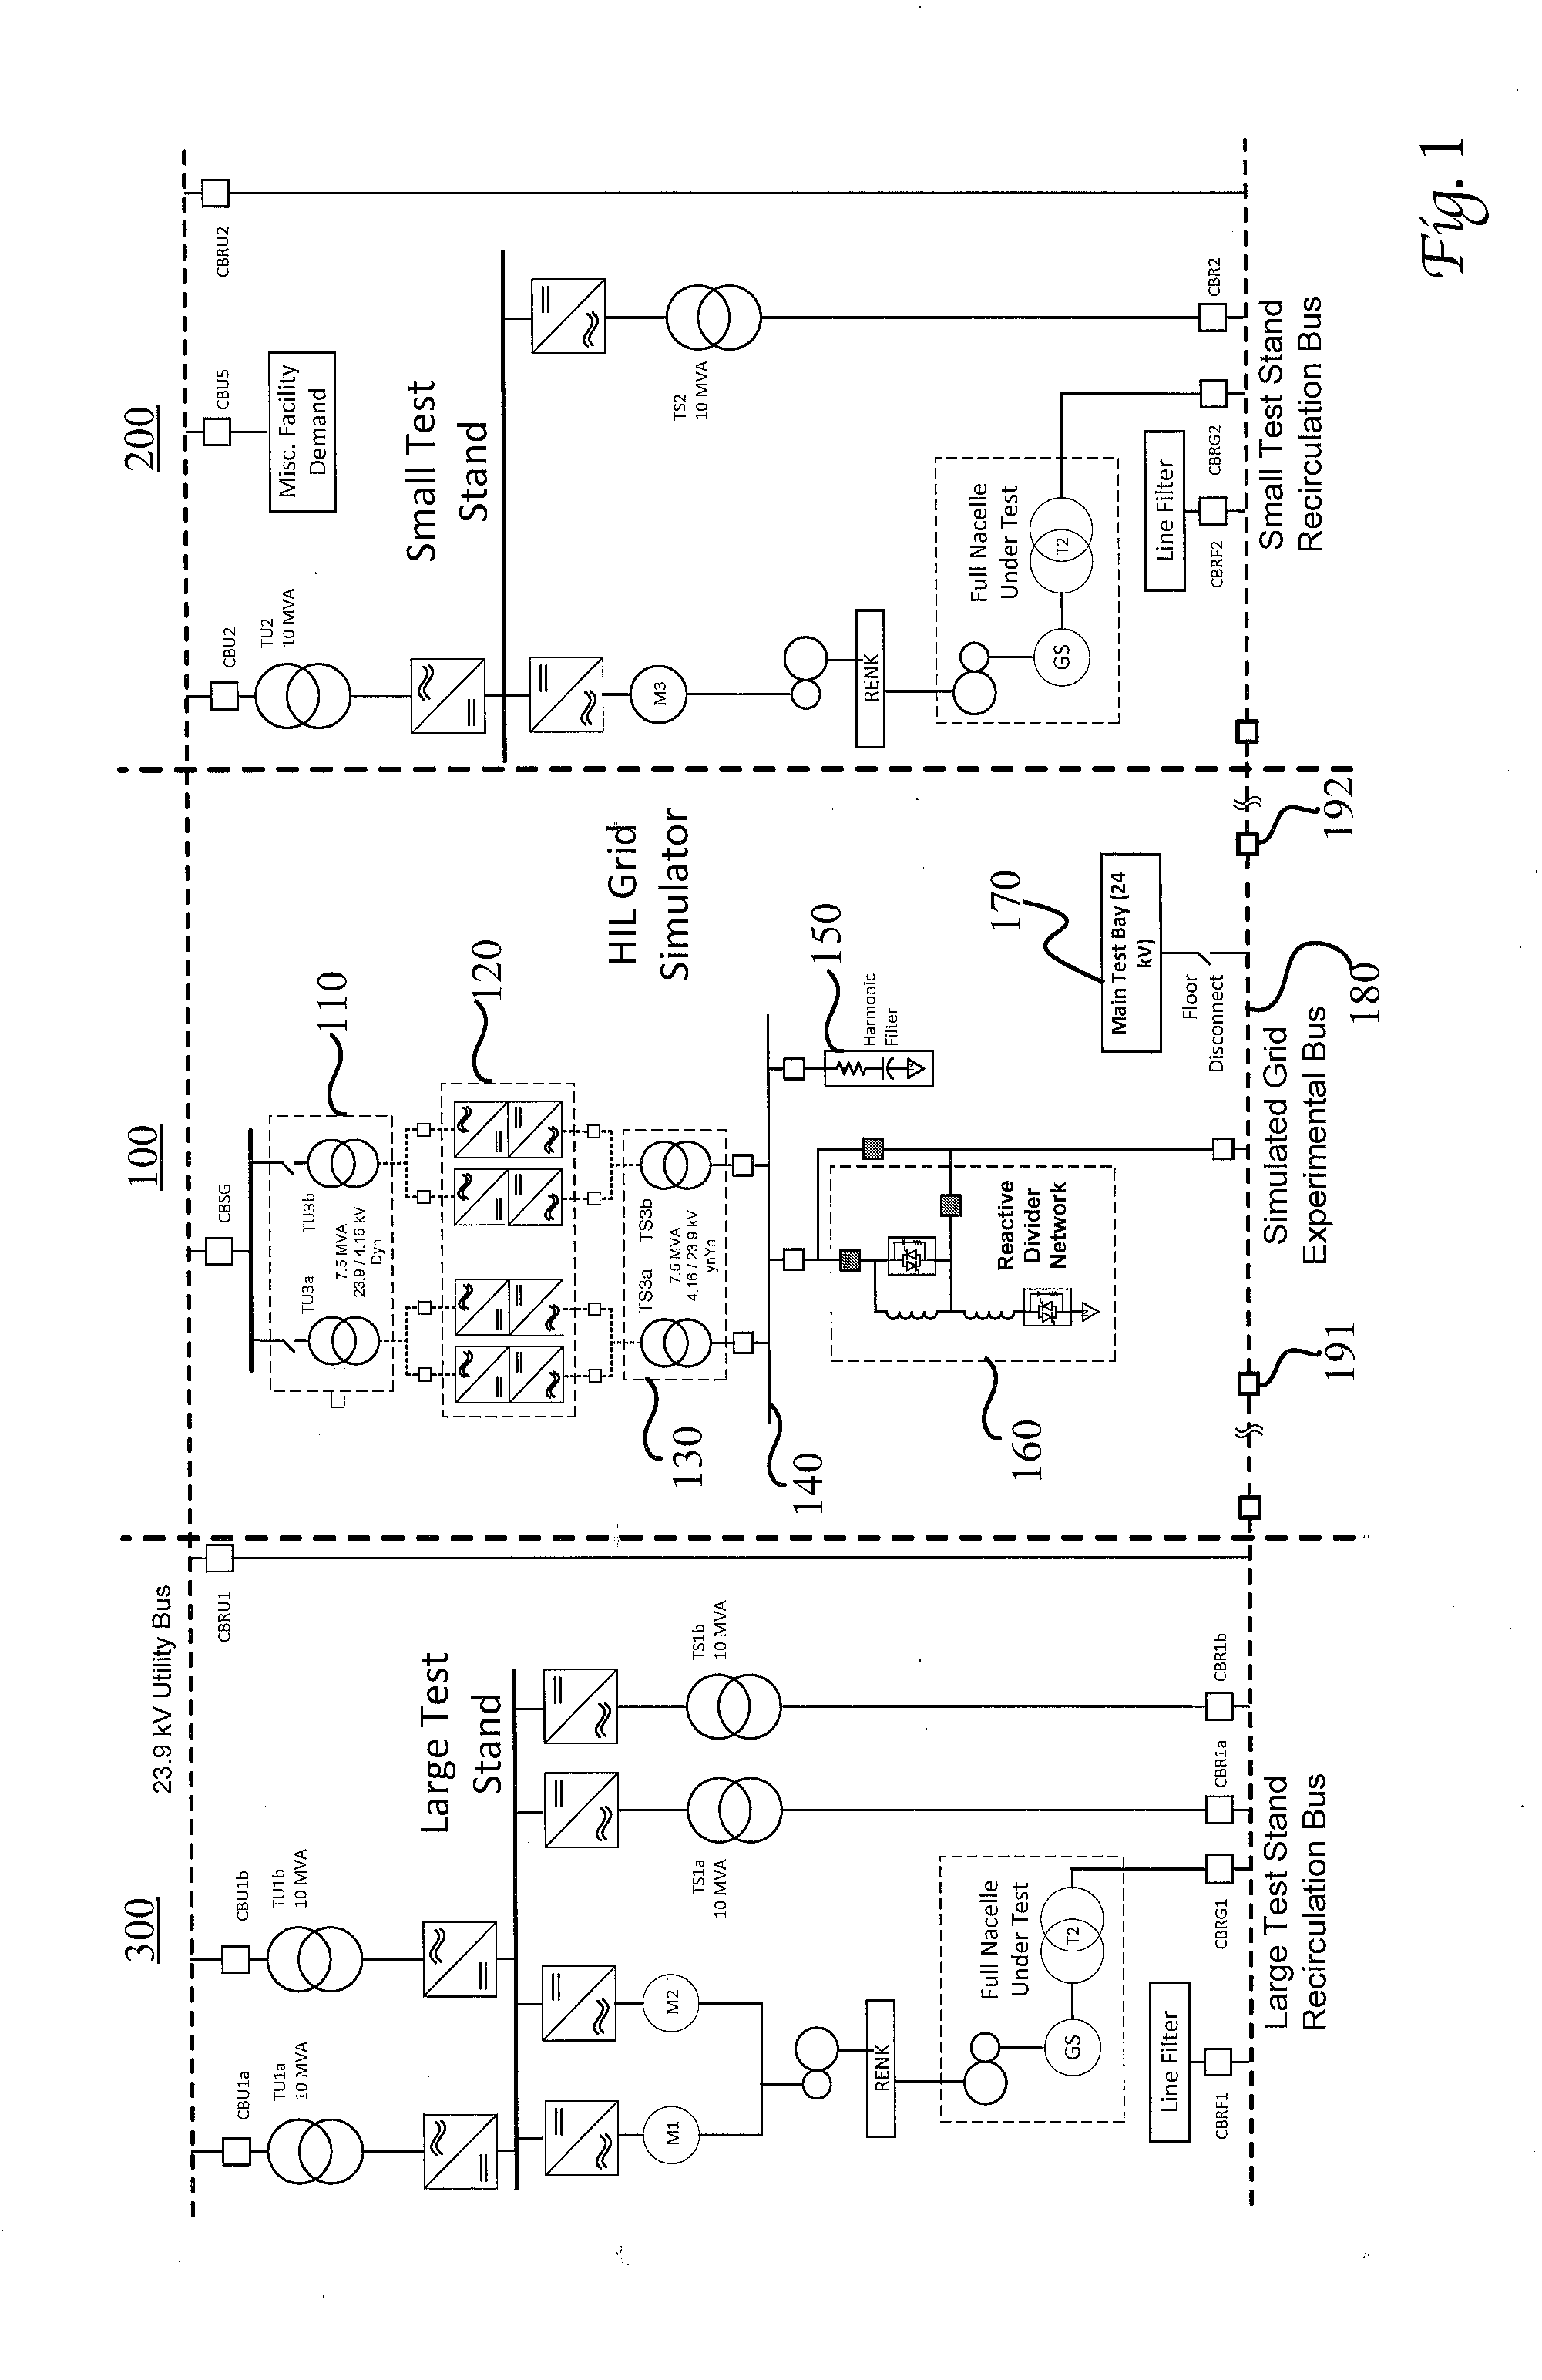 Hardware-in-the-loop grid simulator system and method